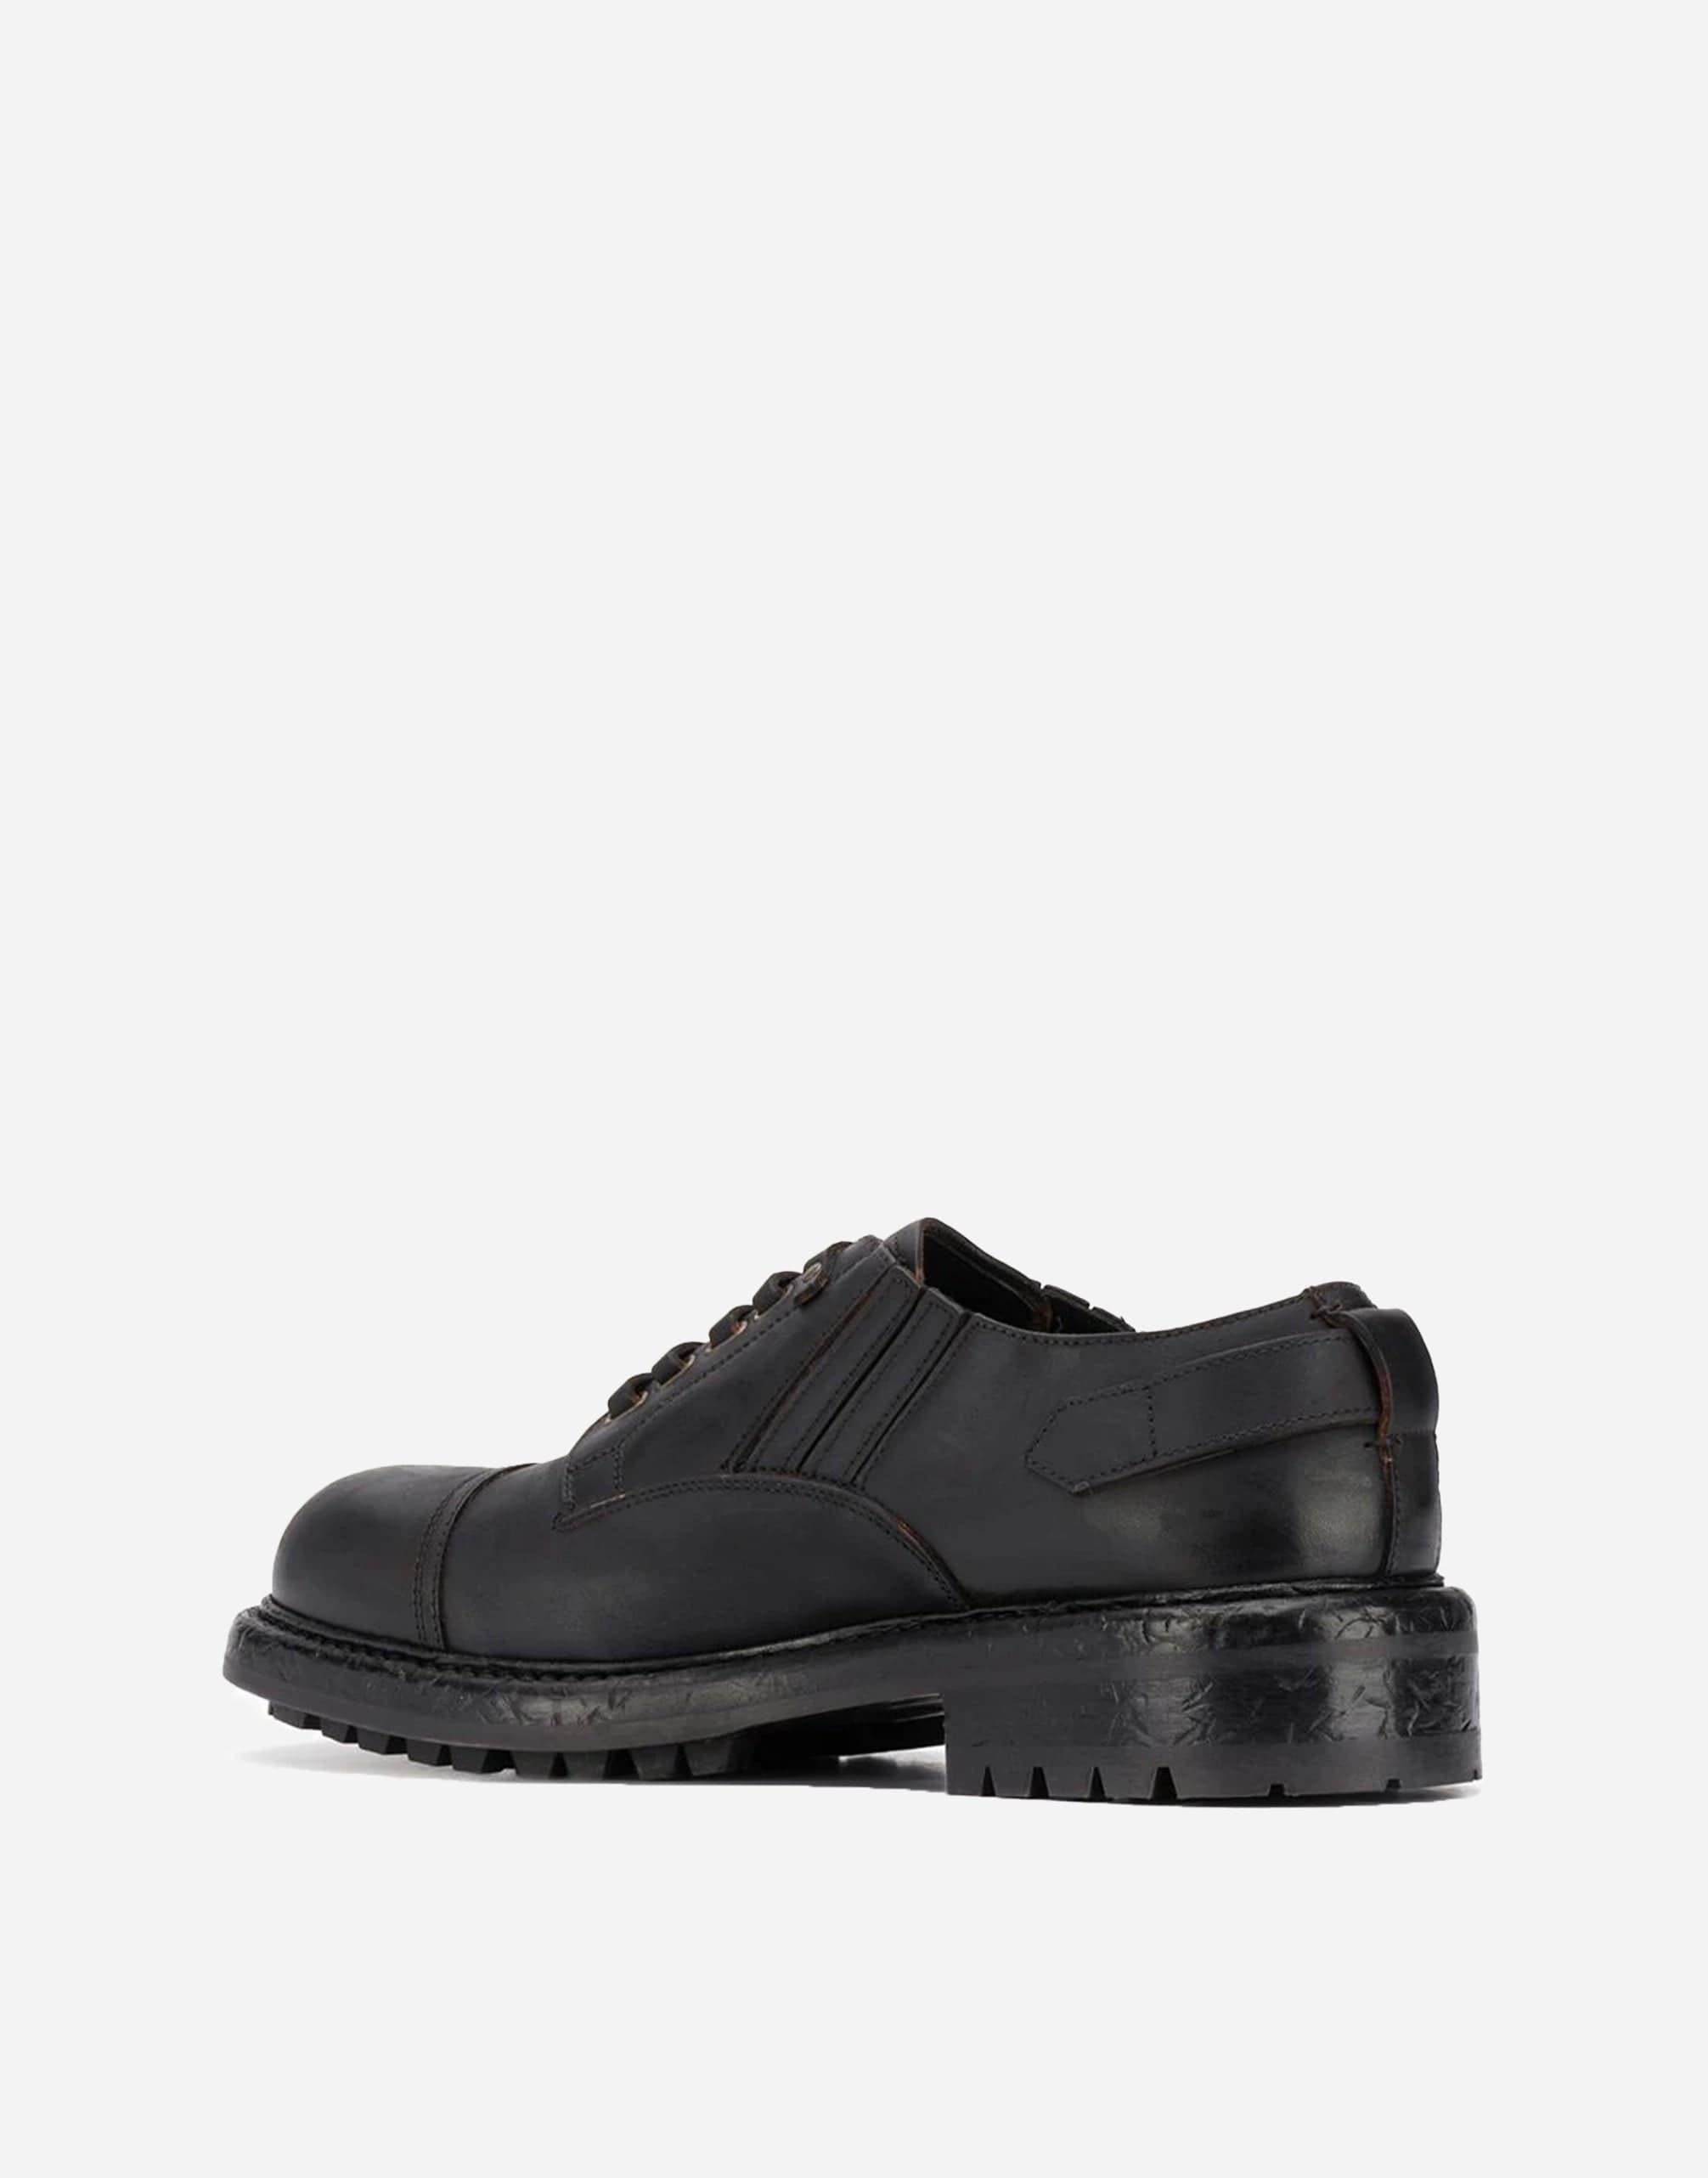 Dolce & Gabbana Leather Buckle Derby Shoes